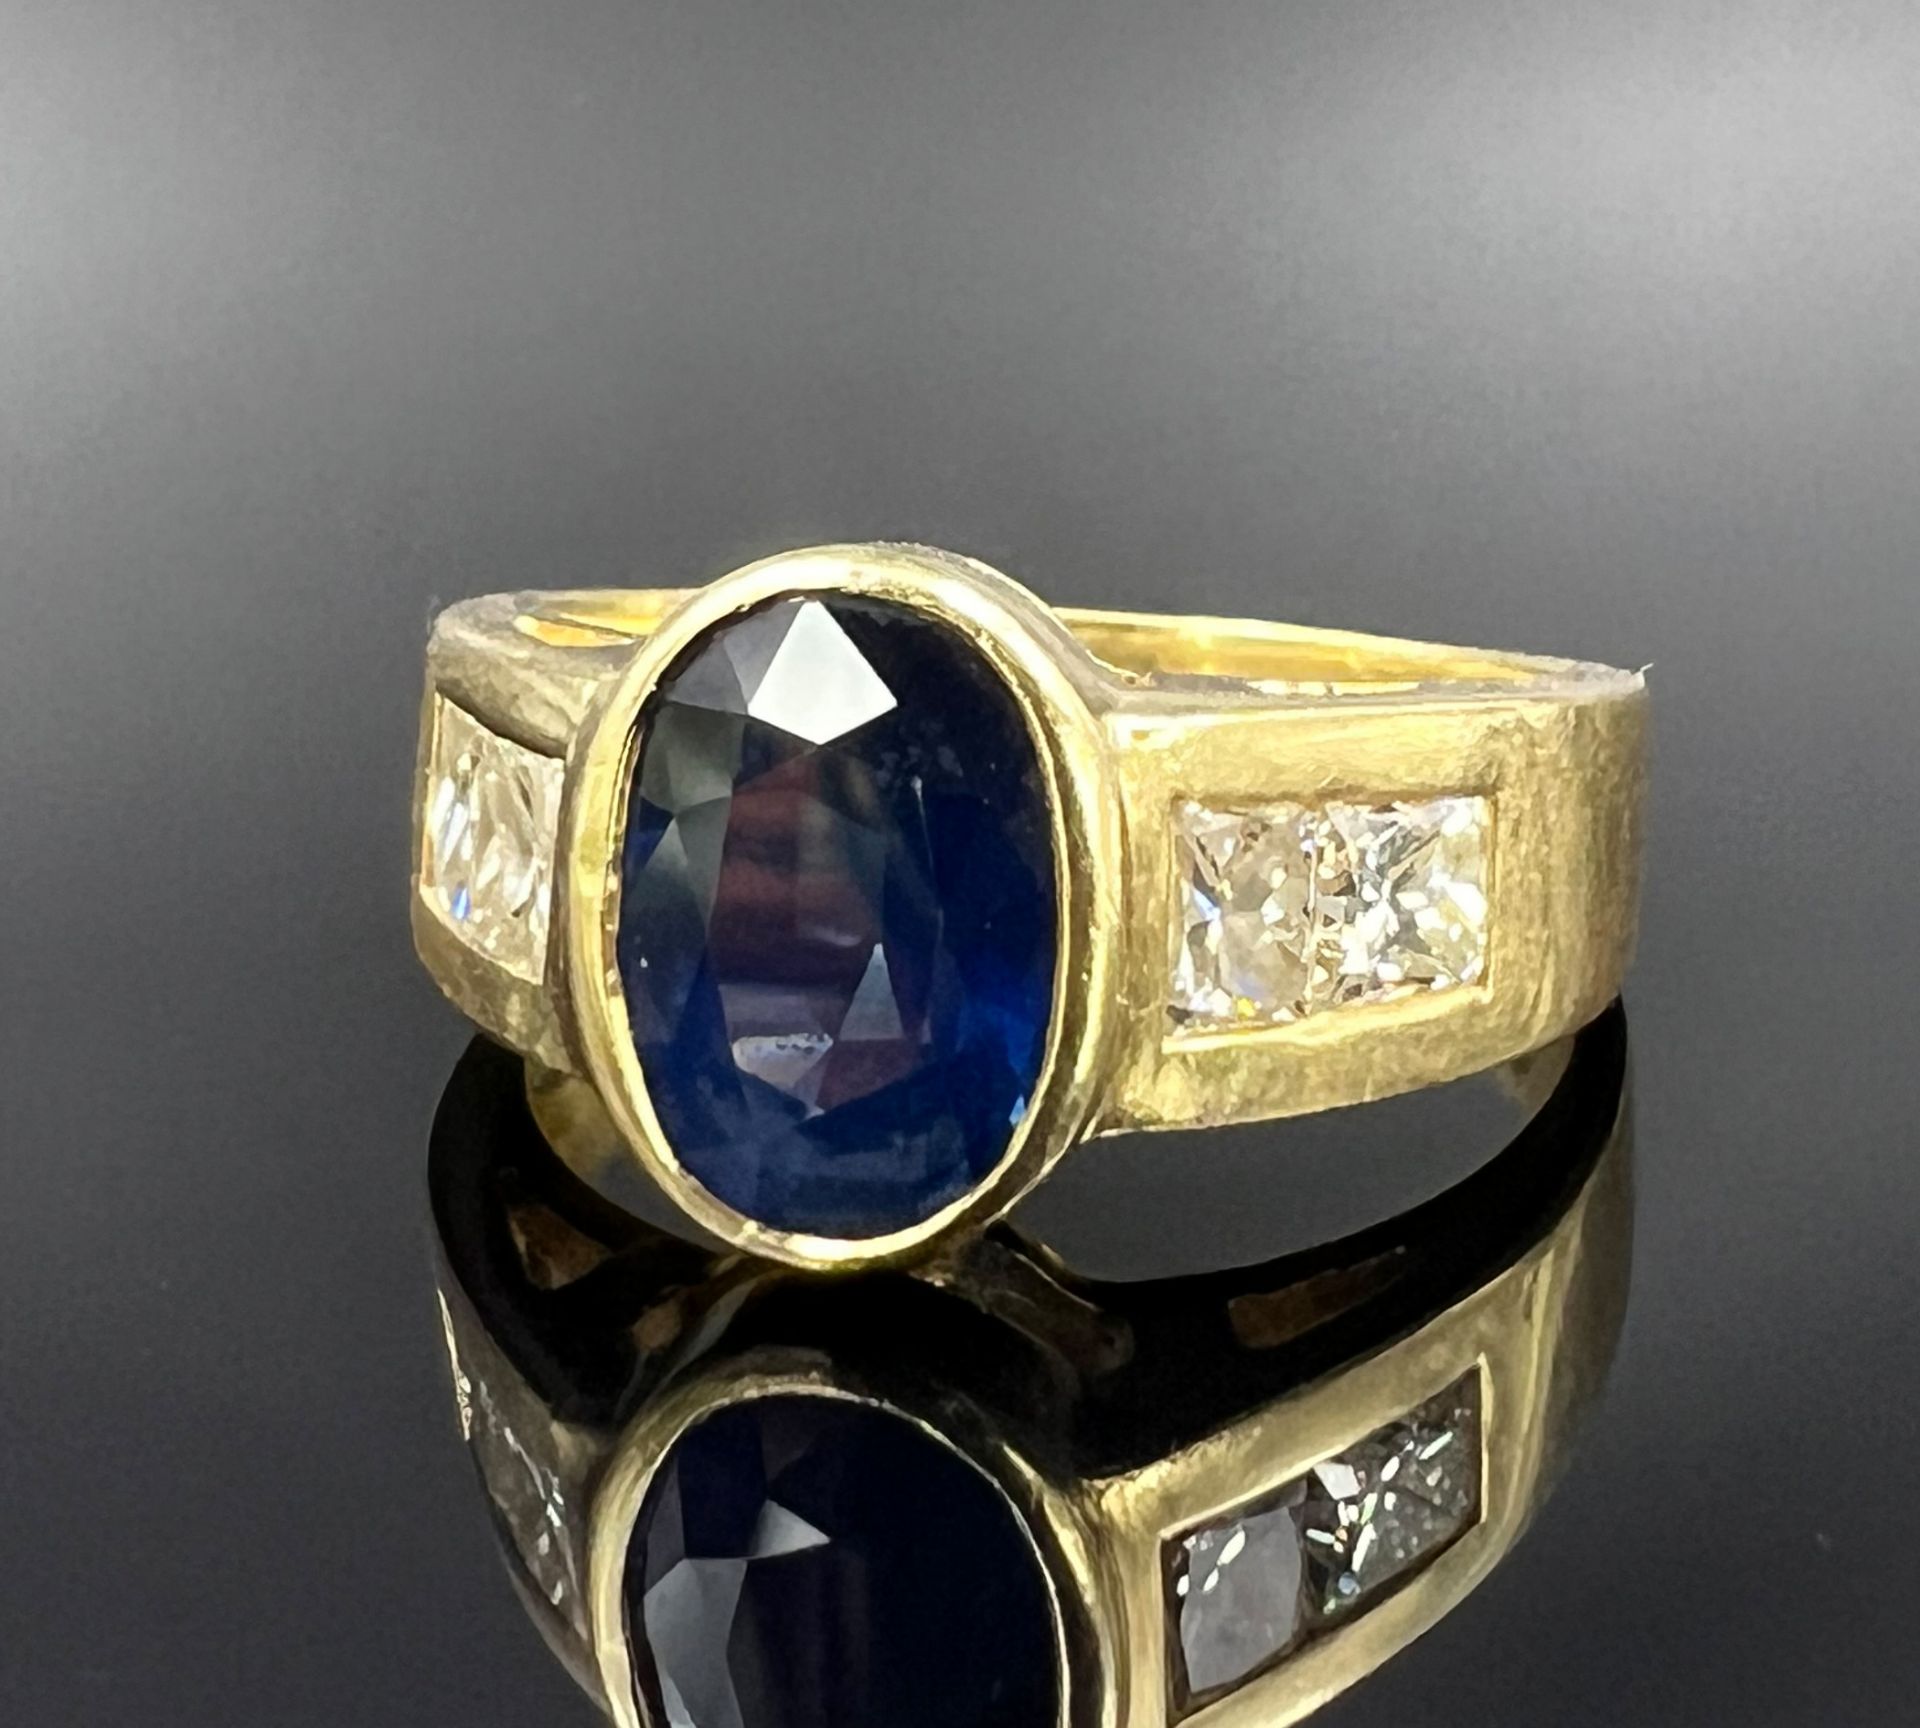 Ladies' ring. 750 yellow gold. 1 blue colored stone and 4 diamonds.